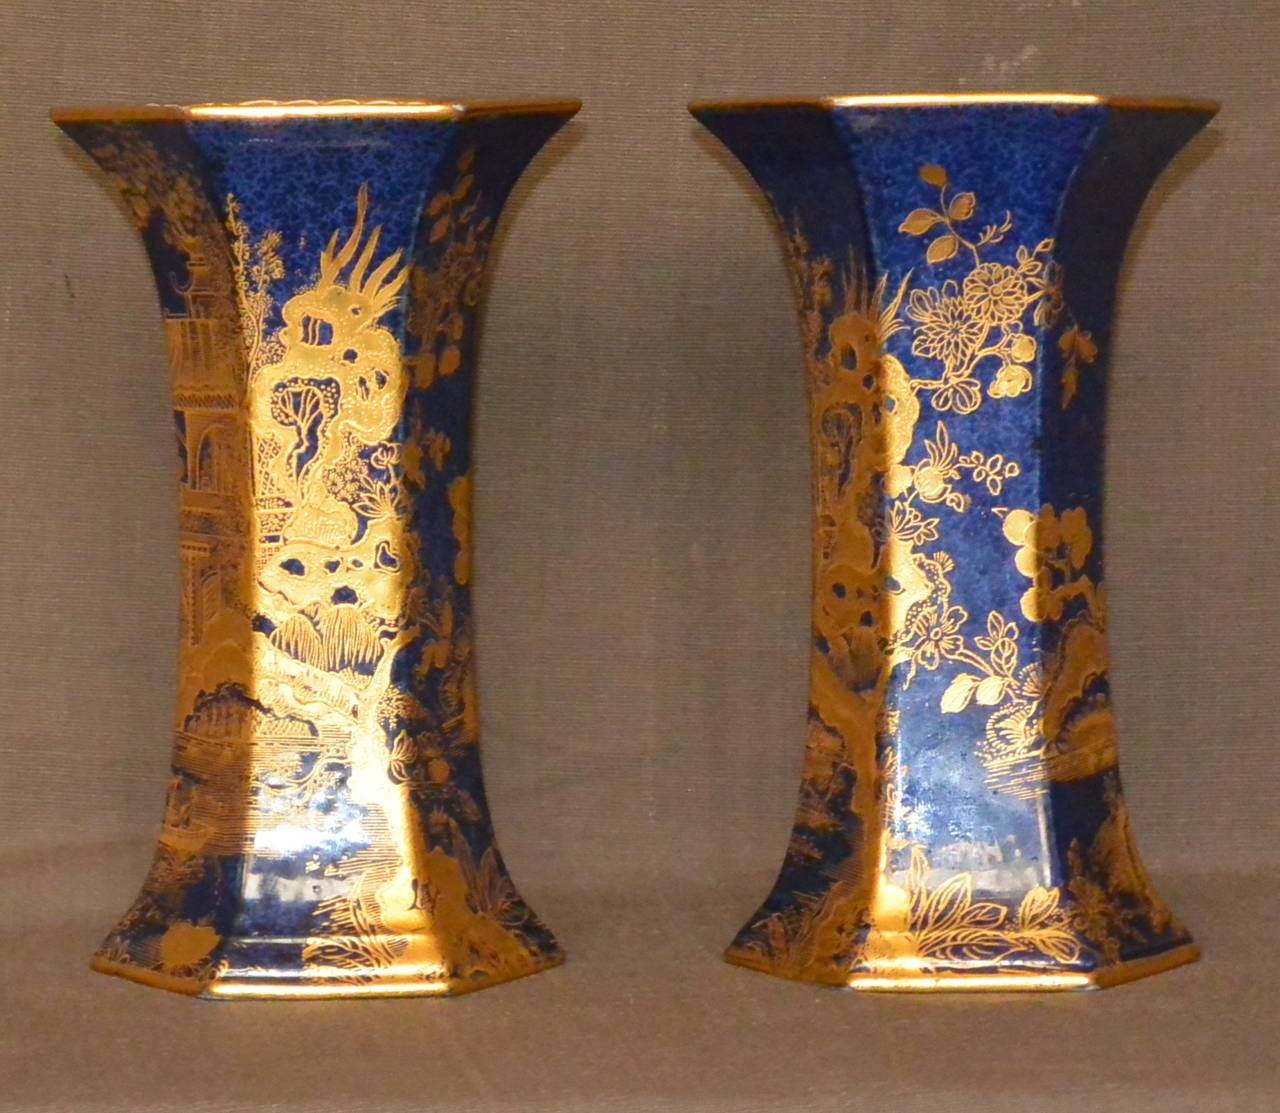 Pair hexagonal English Wilton Ware blue and gold vases, c.1923-34.  A.G. Harley Jones 1907-1934.
Dimension: 6.125